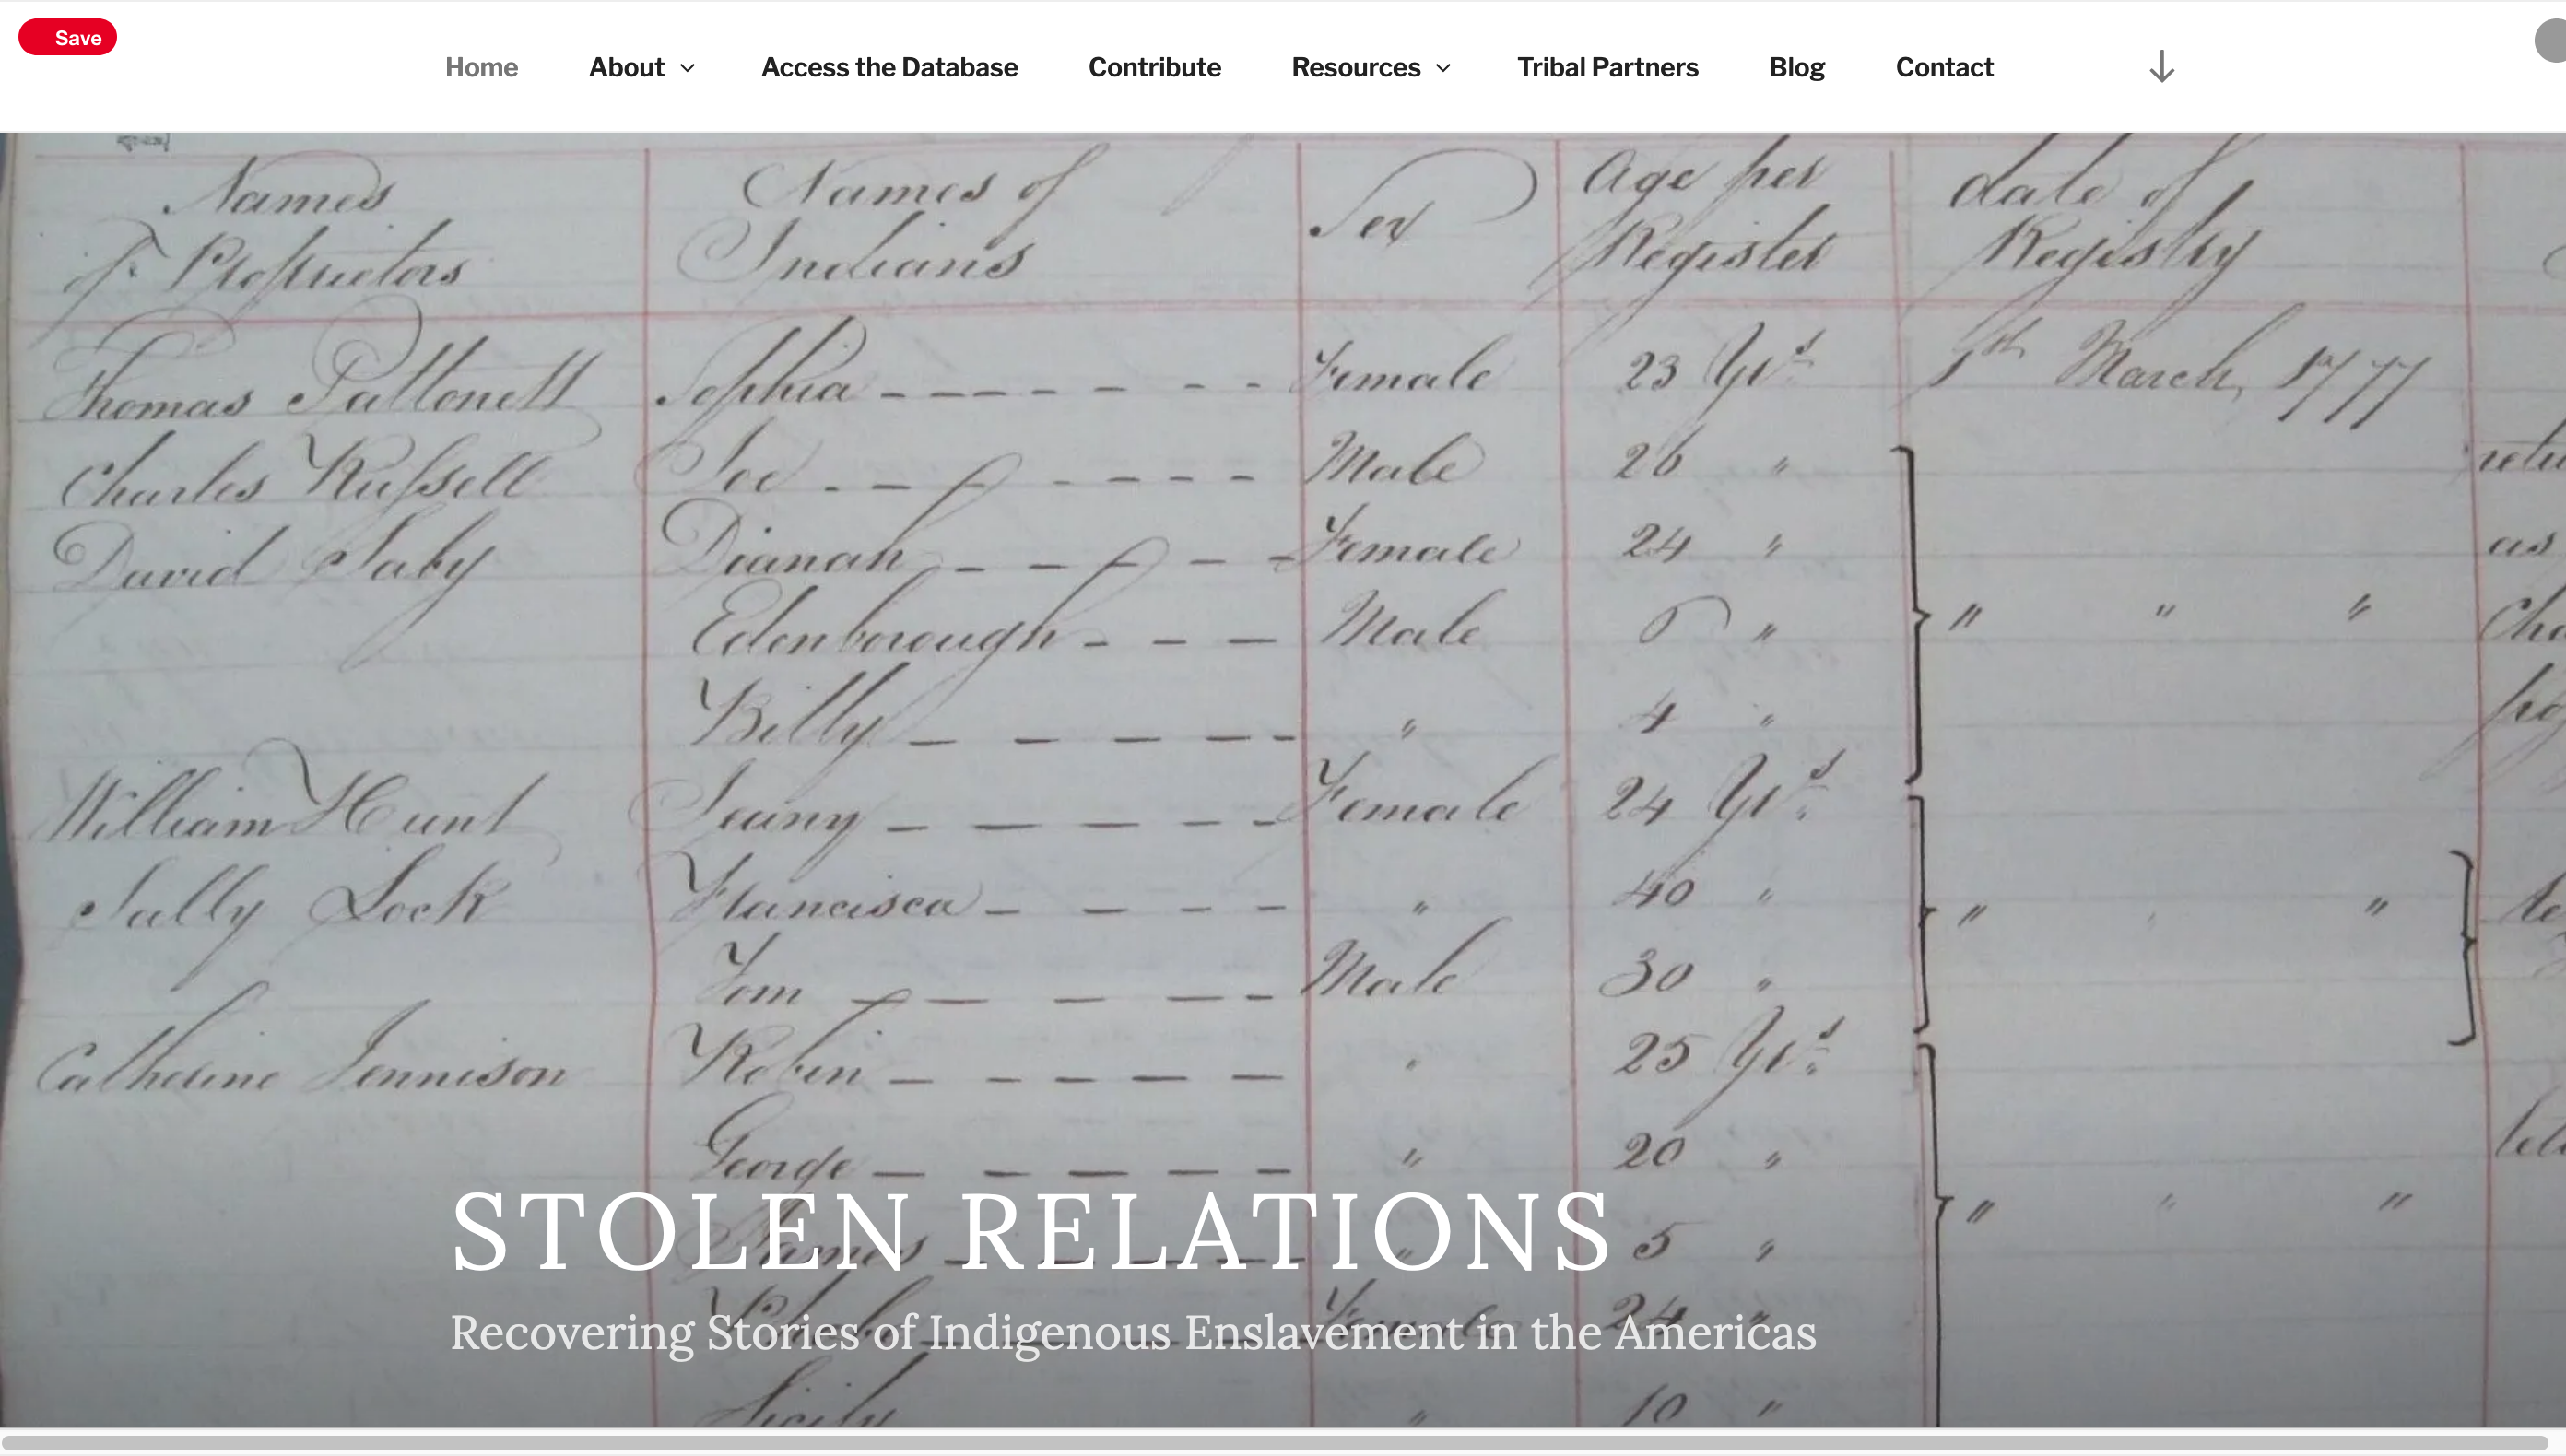 Stolen Relations: Recovering Stories of Indigenous Enslavement in the Americas